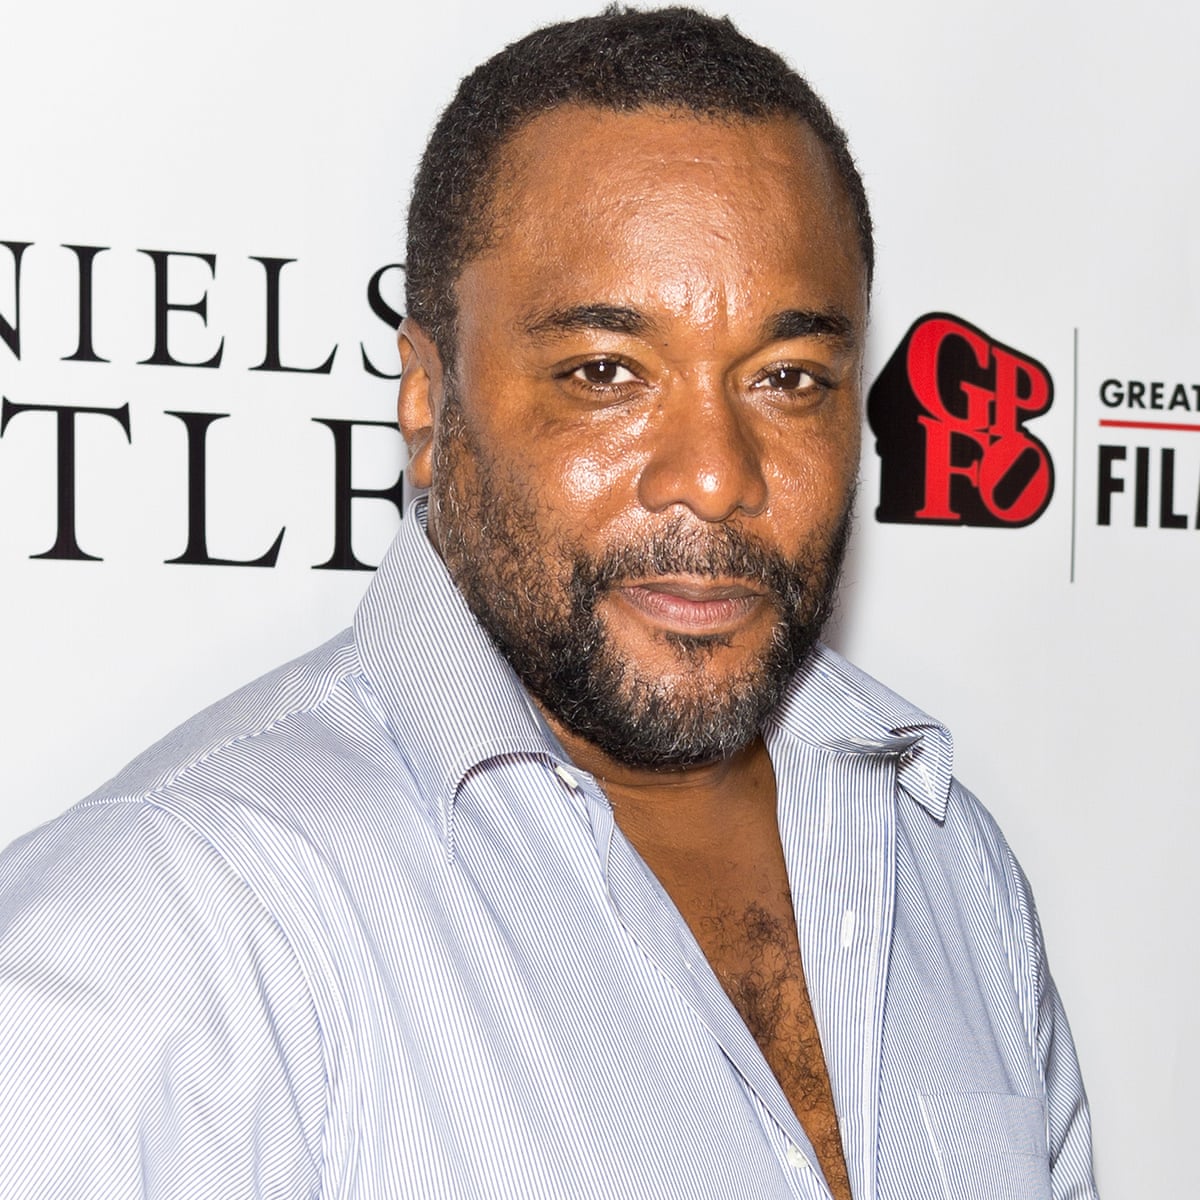 Lee Daniels to make movie musical based on his own life | Lee Daniels | The  Guardian